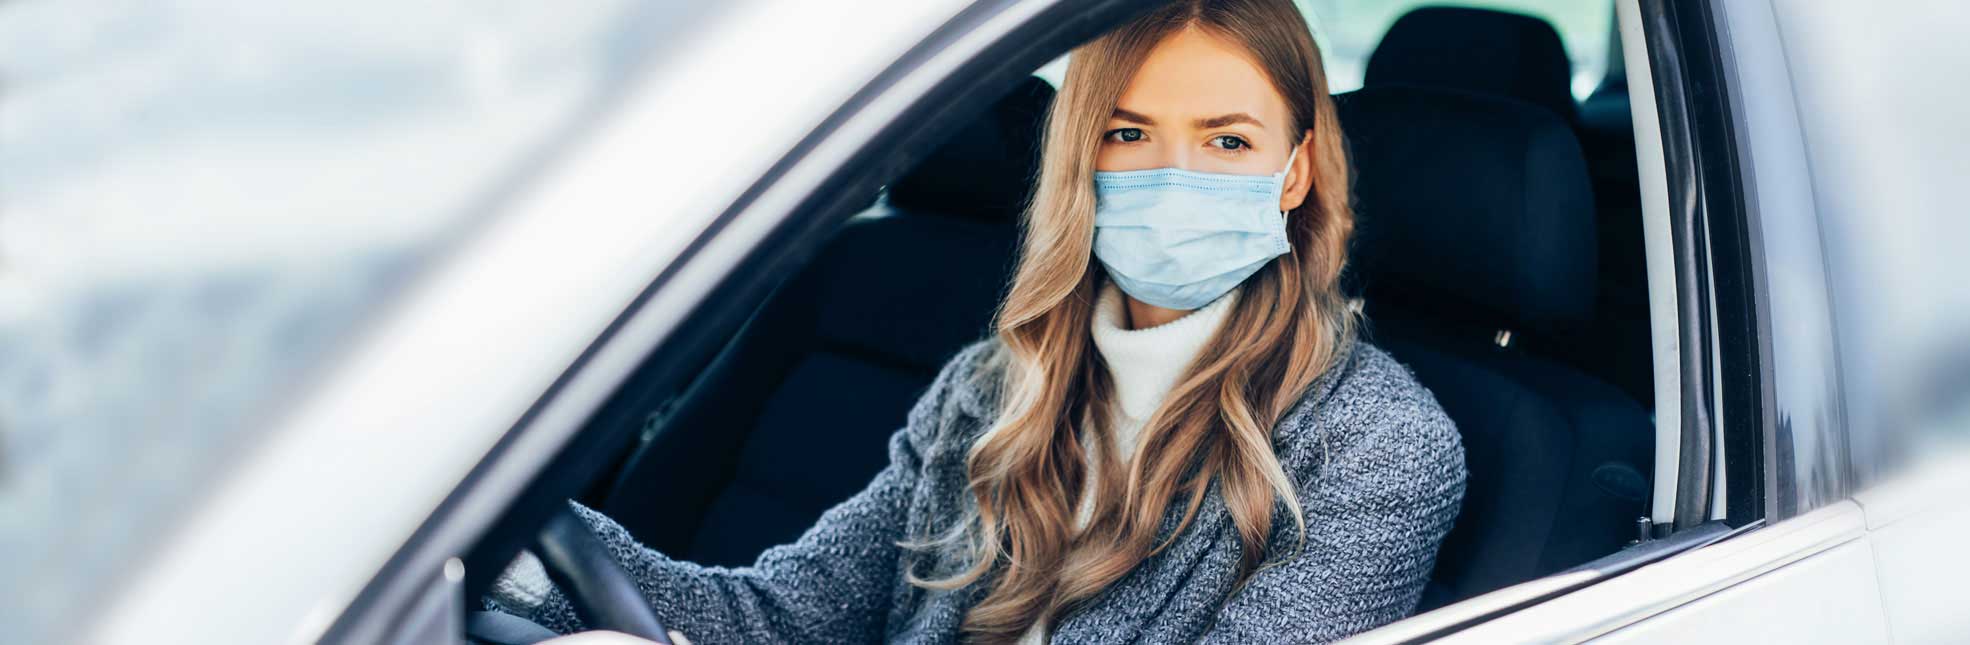 young woman driving a car with a mask on